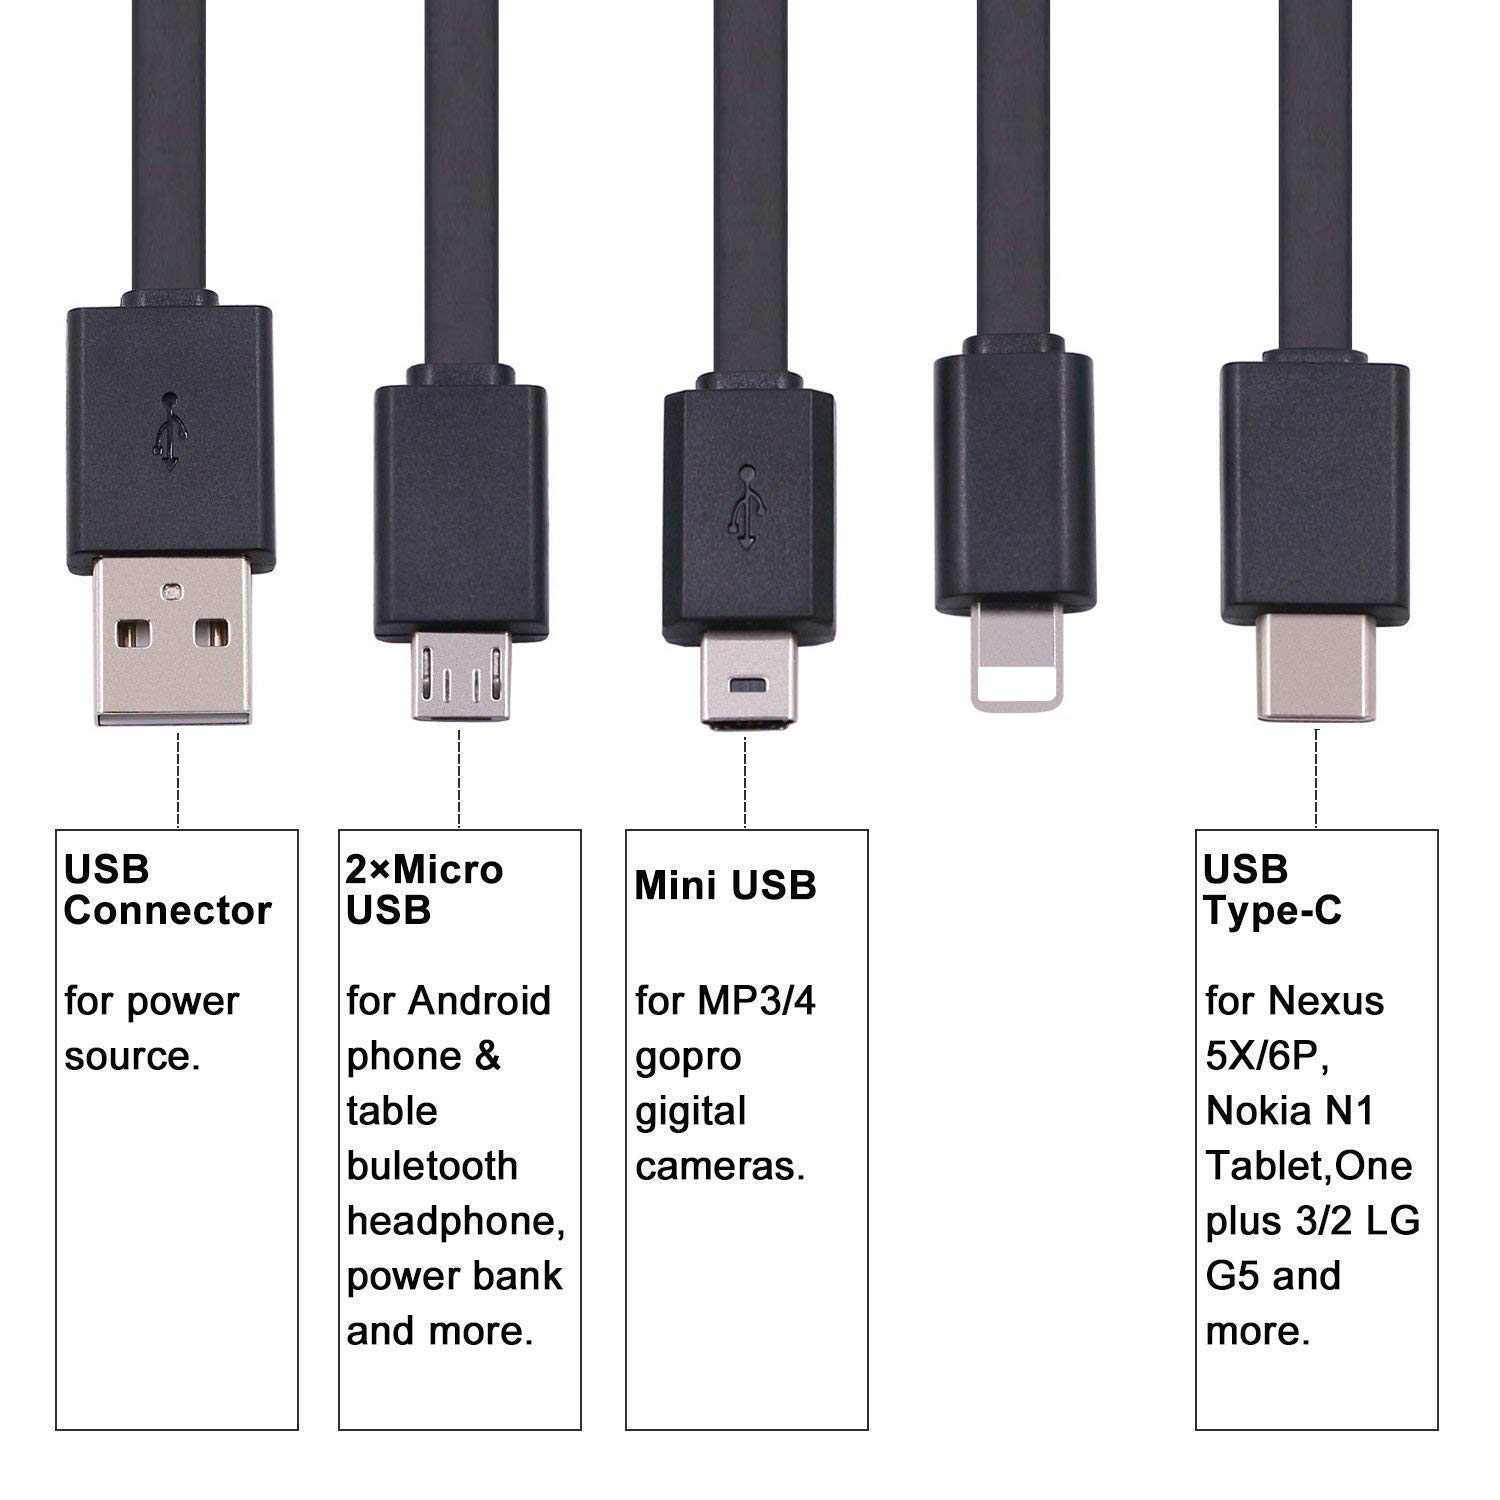 USB cable and ports